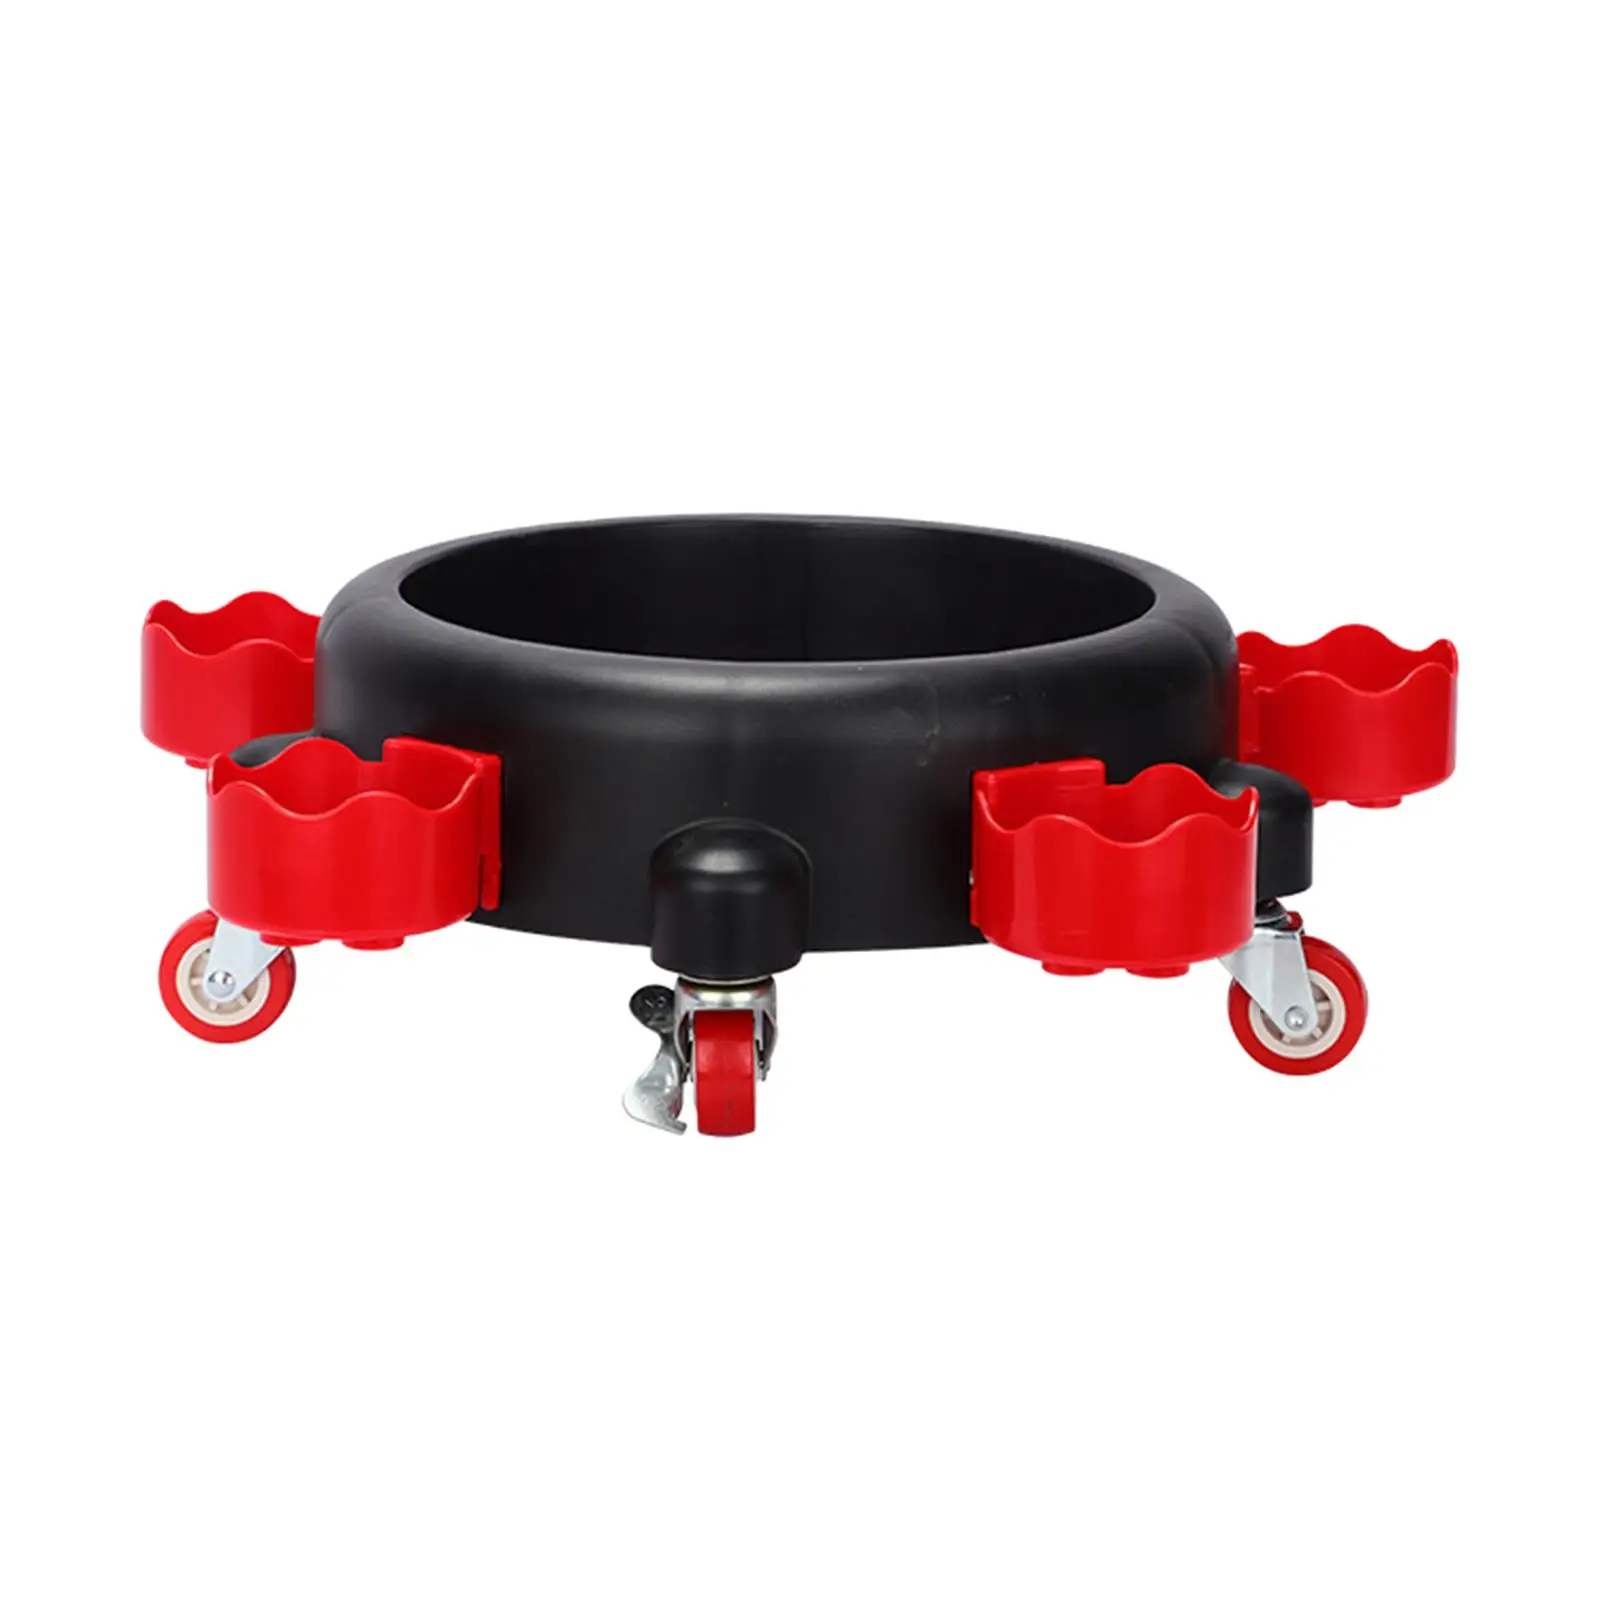 Bucket Dolly 360 Degree Rolling Dolly Heavy Duty Car Wash Bucket Base Pulley for Car Beauty Car Washing Detailing Cleaners